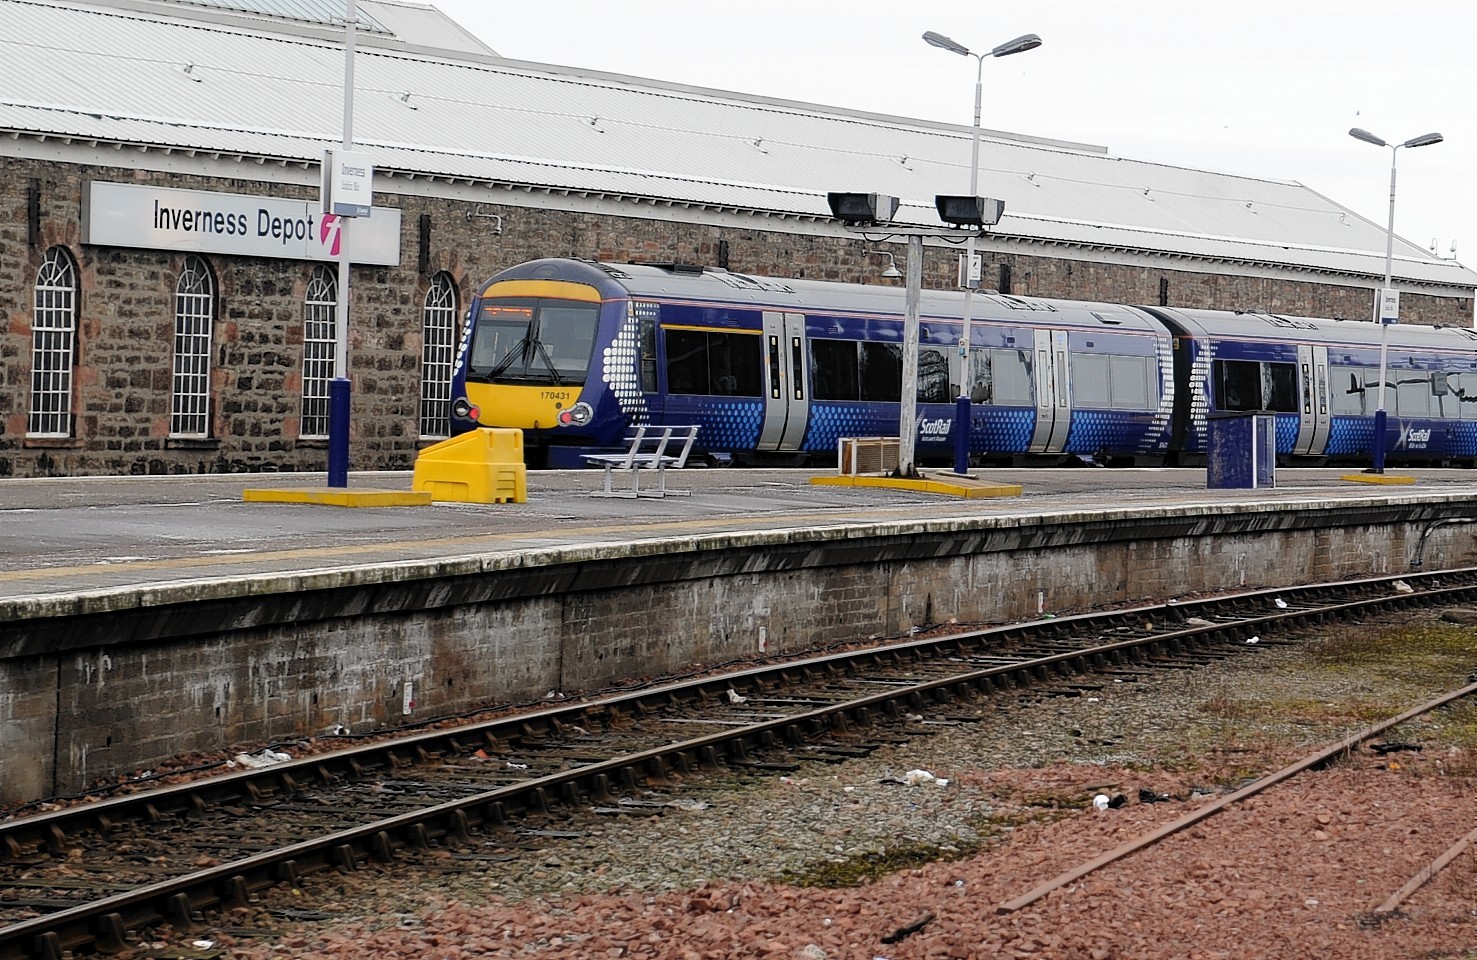 A train pulls out of Inverness station